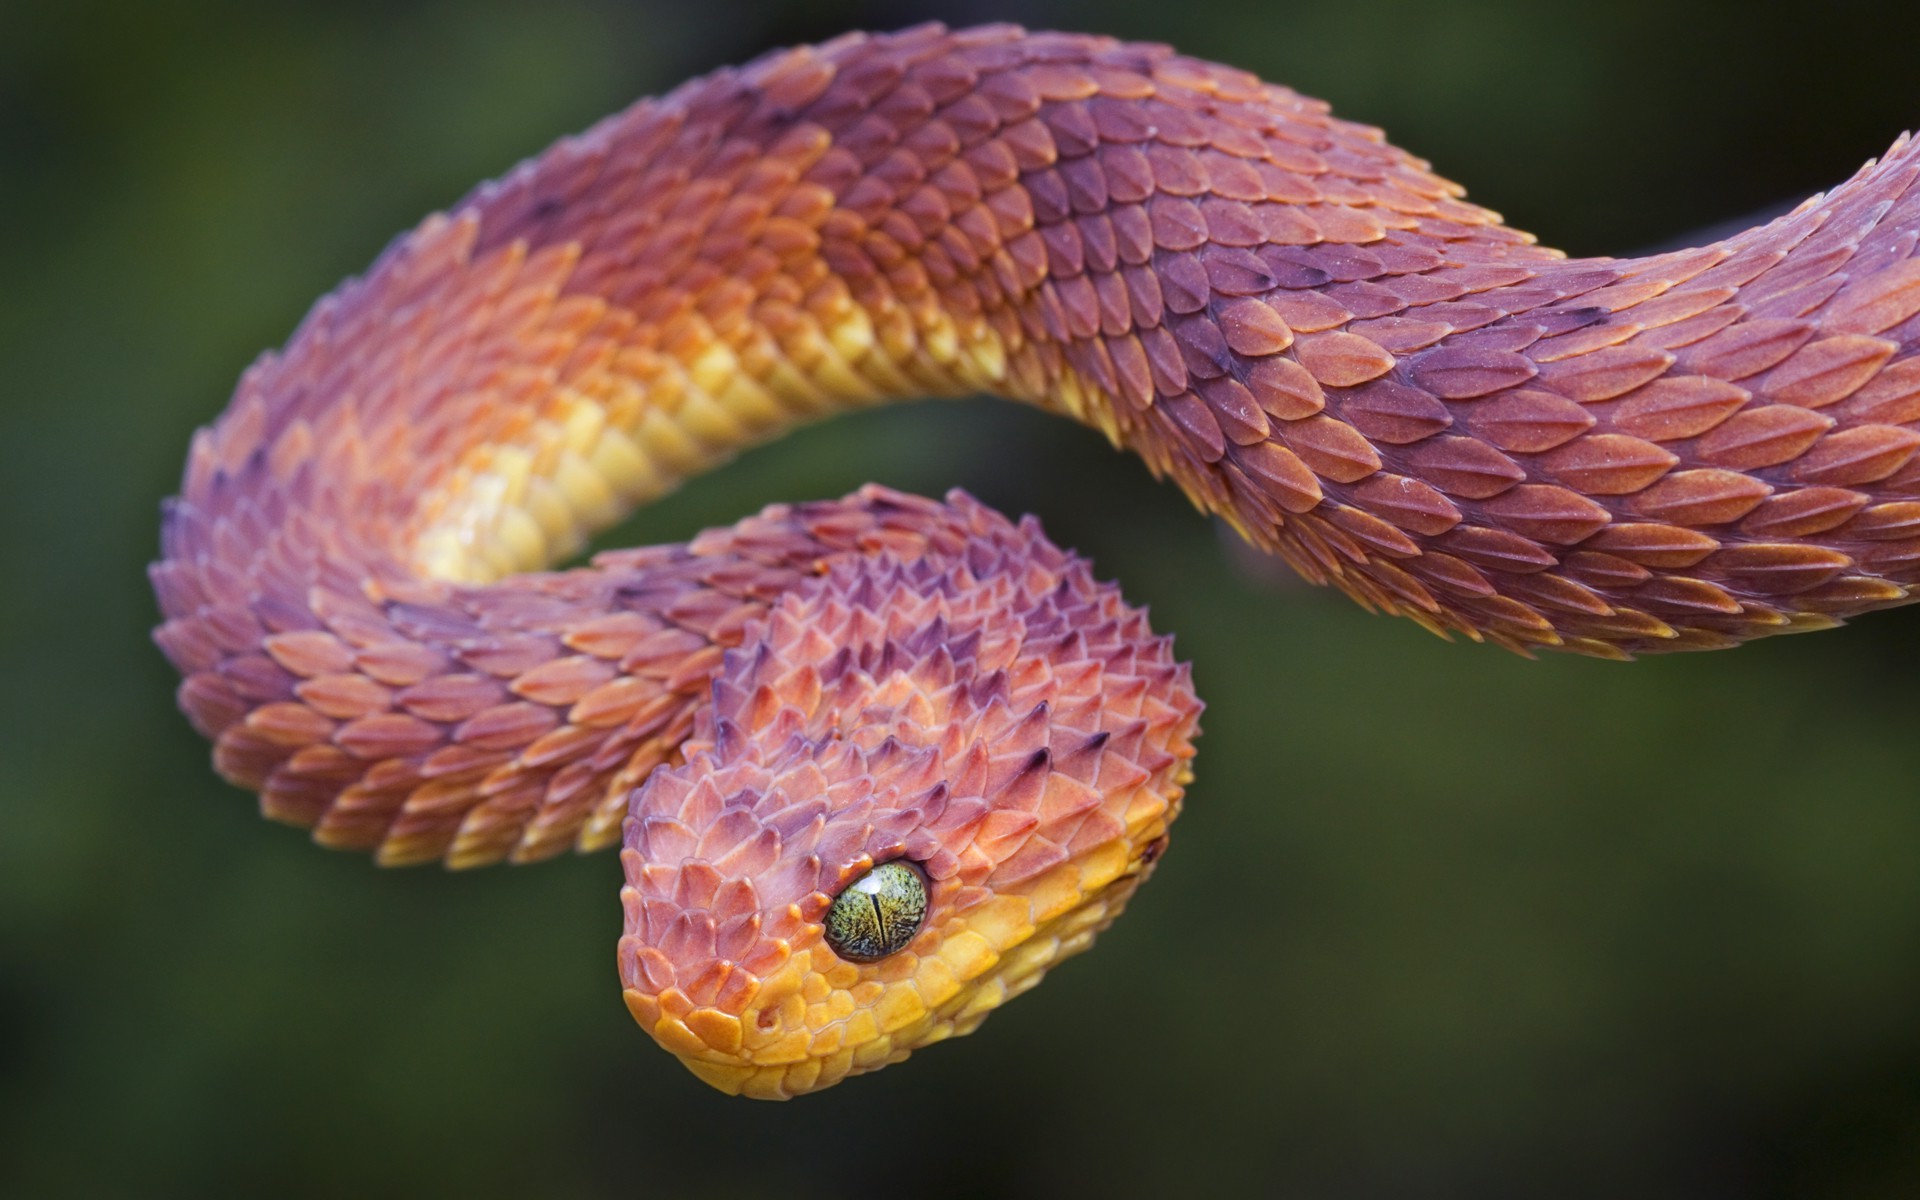 snake-vipers-reptile-animals-wallpapers-hd-desktop-and-mobile